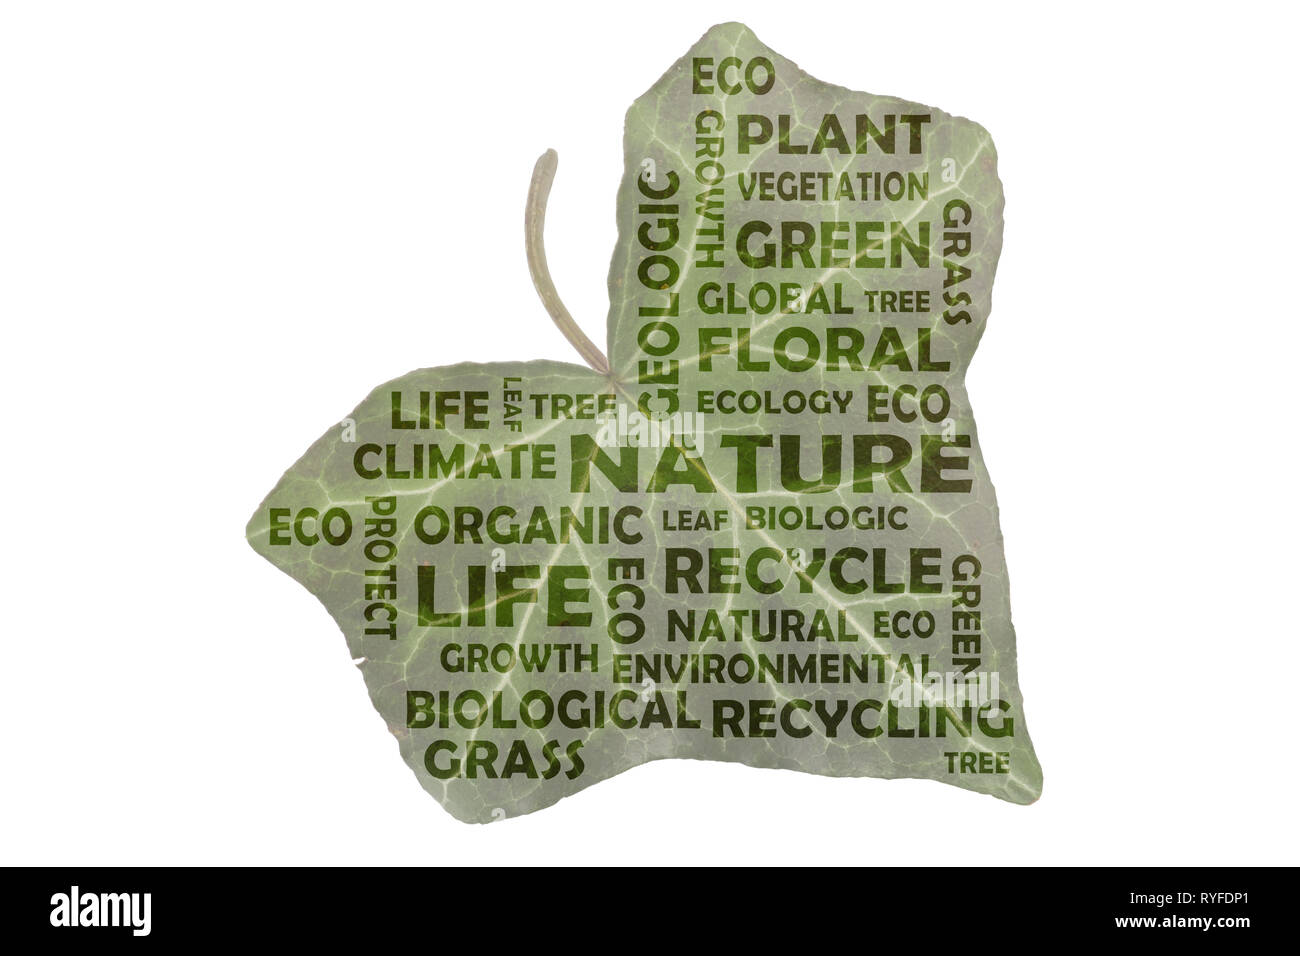 Tag cloud about the main keyword nature. The words are highlighted on a real image of an ivy leaf to naturally represent the theme nature. Stock Photo